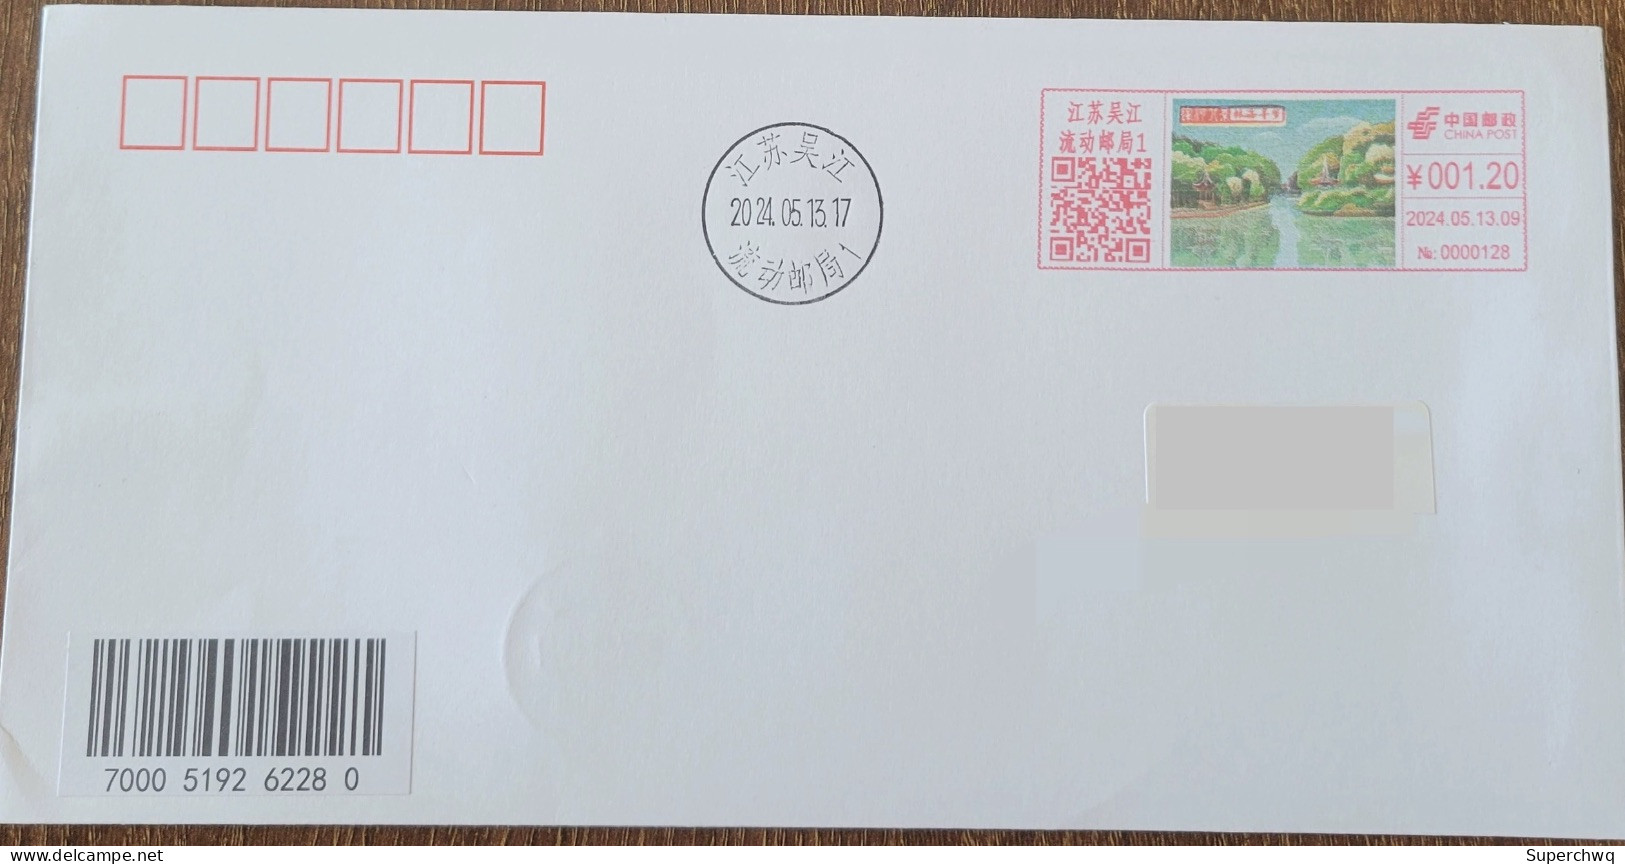 China Cover "Eight Scenes Of The Canal - Searching For Dreams In The Forest Sea" (Wujiang, Jiangsu) Colored Postage Mach - Covers